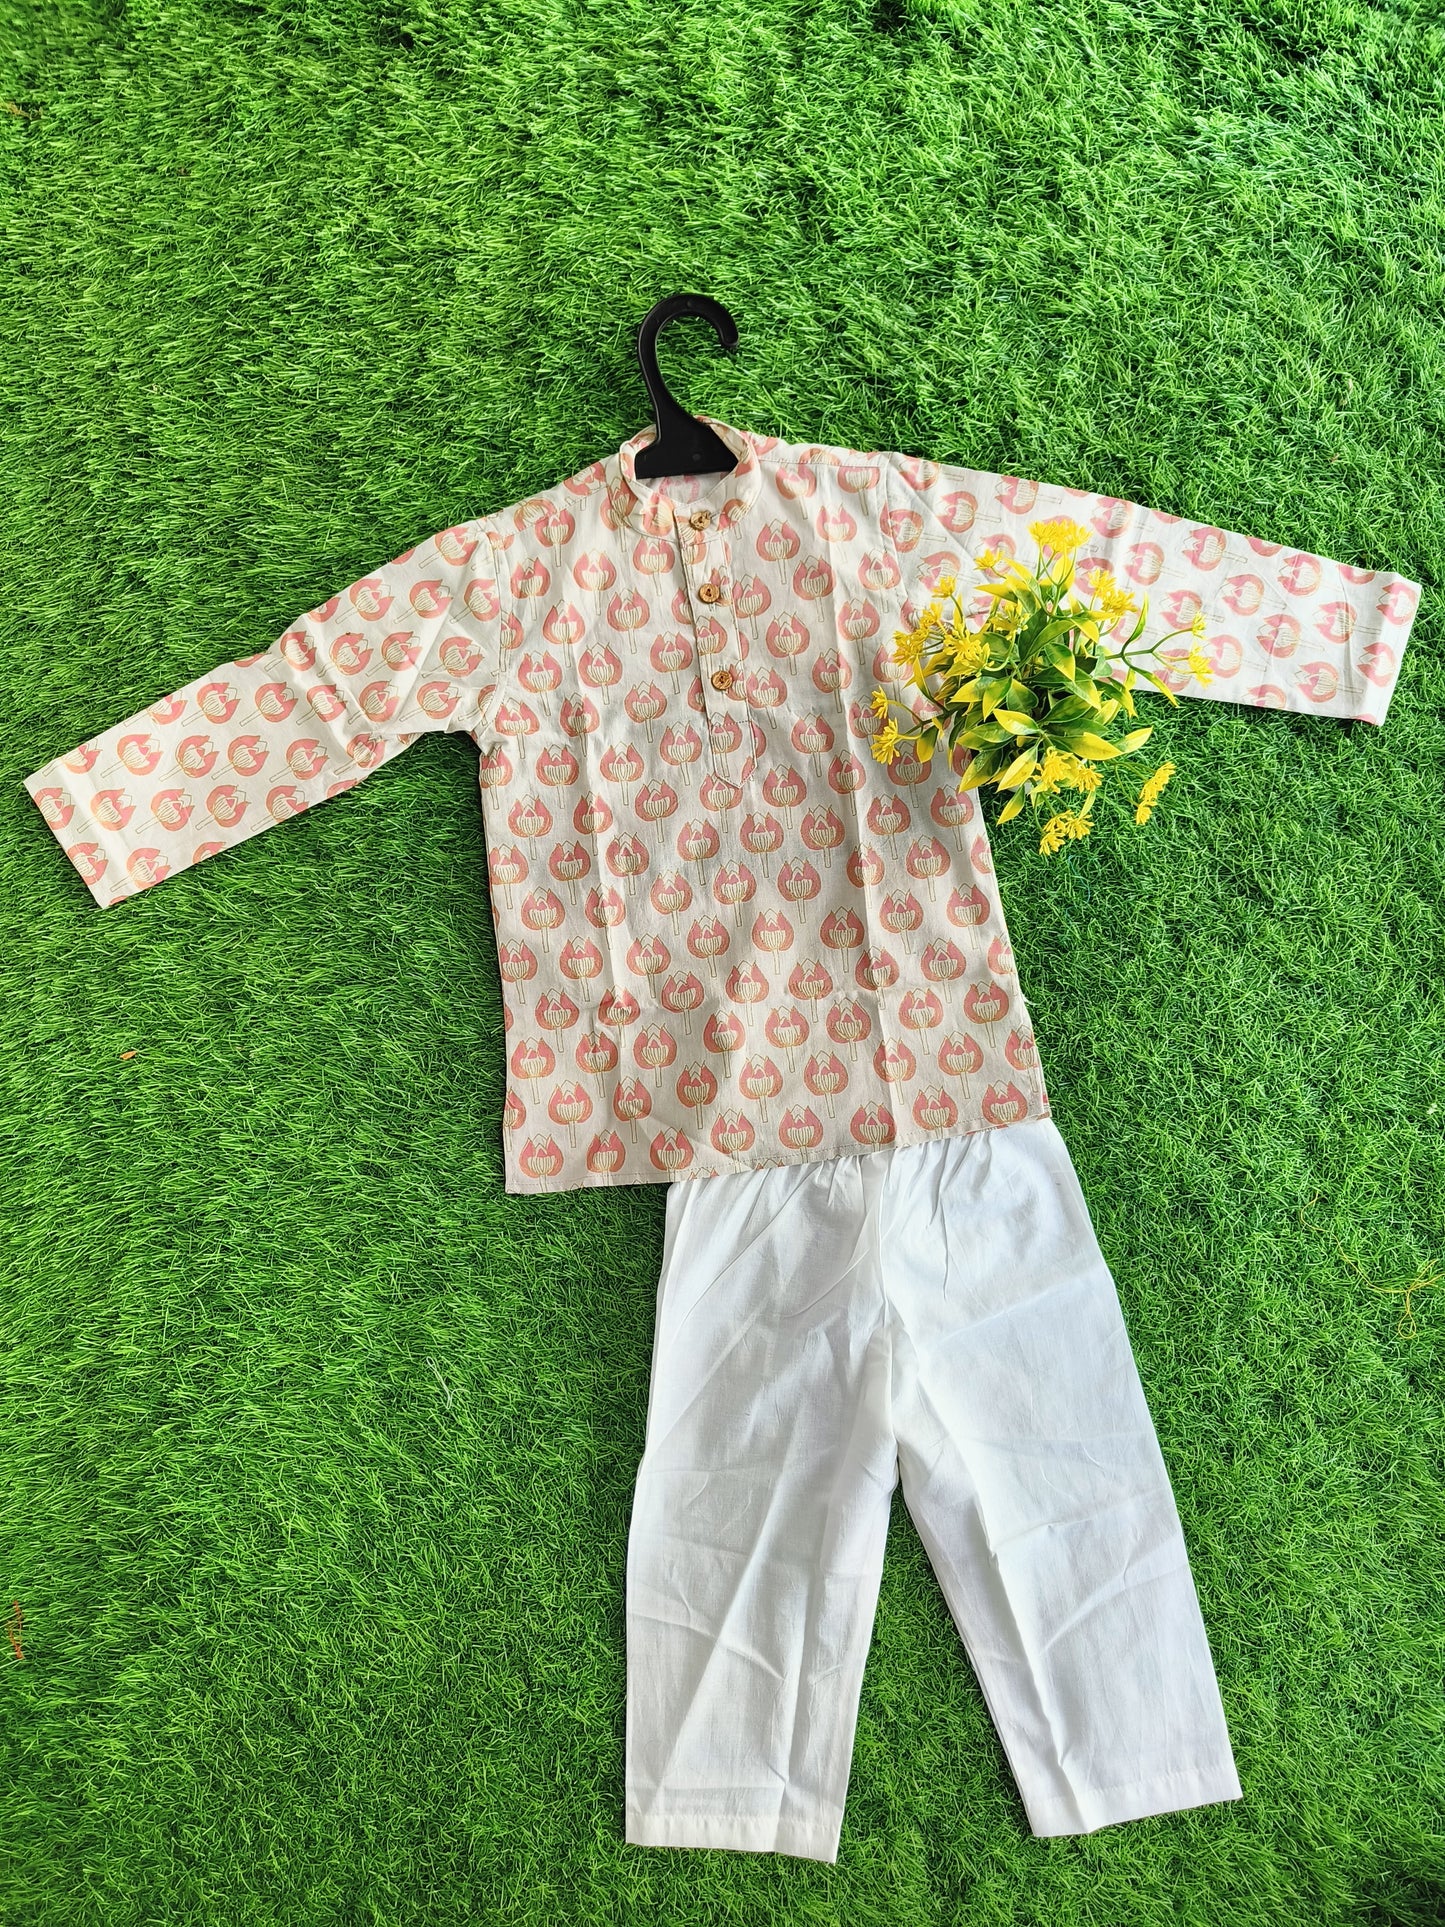 Trover Rich Style Printed Cotton Kurta Pajama Outfit Set for Boy